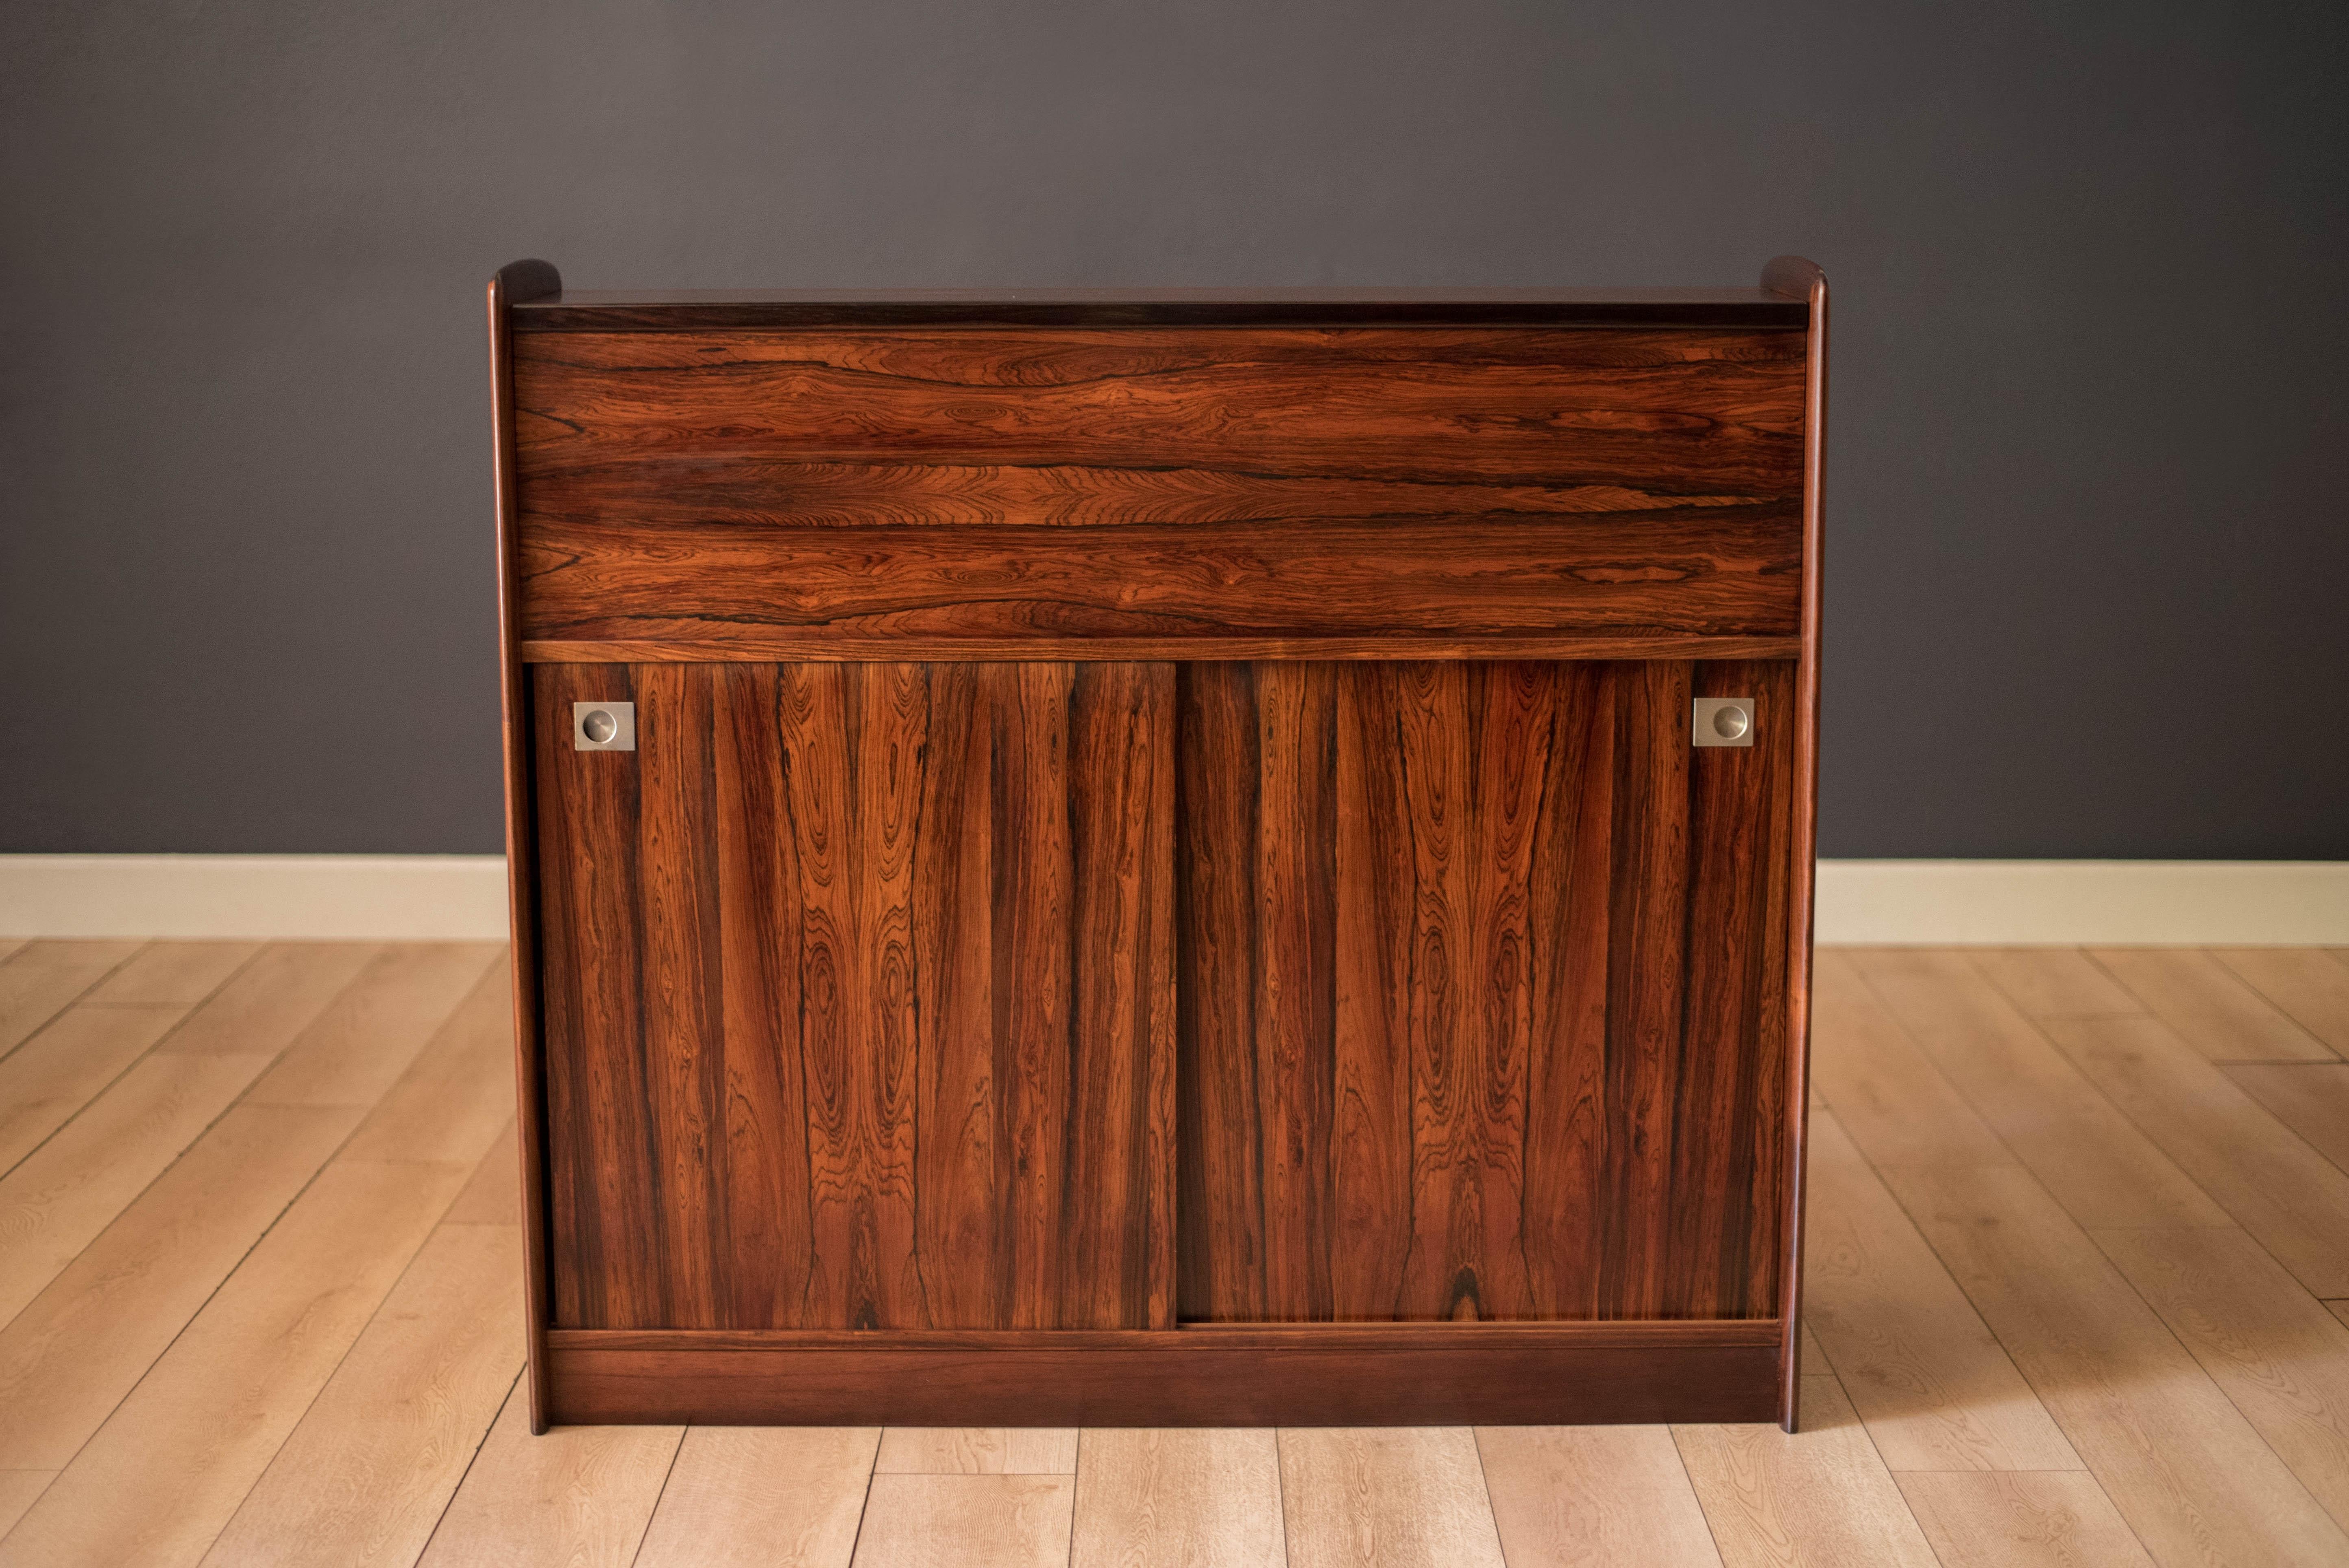 Mid-Century Modern dry bar with sideboard cabinet in rosewood circa 1970’s. Features an expandable serving countertop with an easy to maintain black laminate surface. The interior bar is equipped with one removable shelf, five bottle holders, a